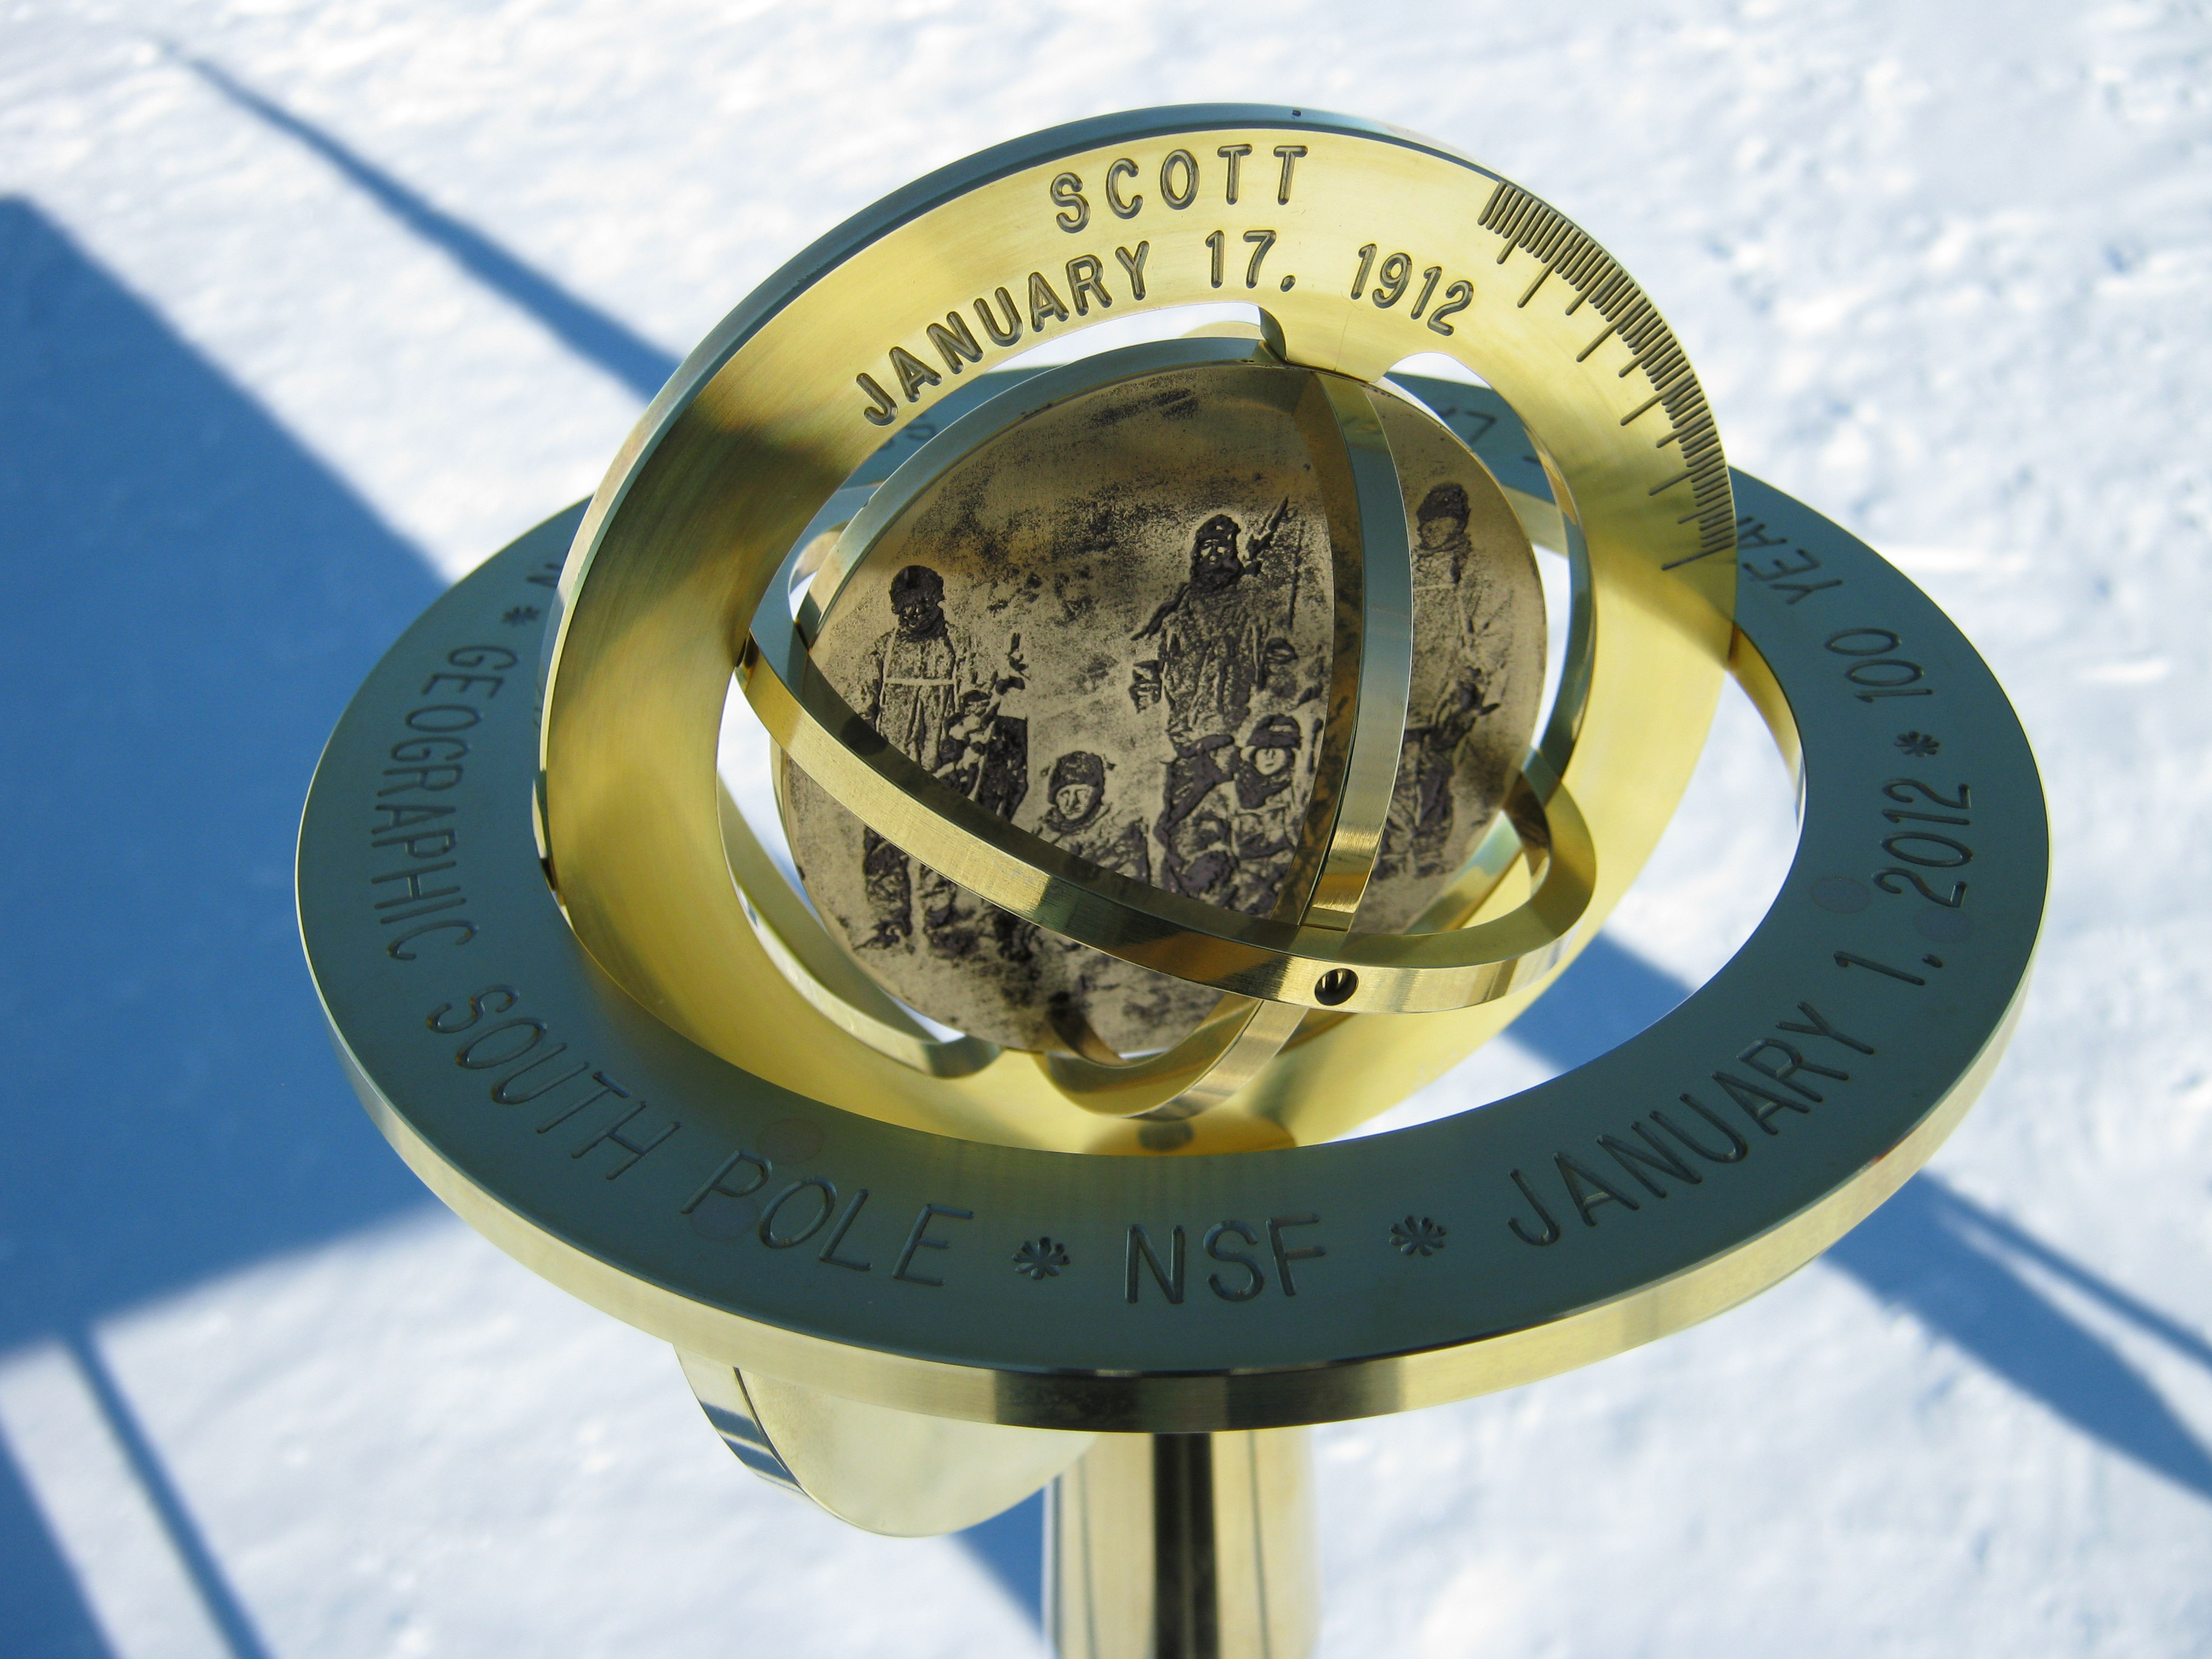 Brass pole marker stands in the snow.